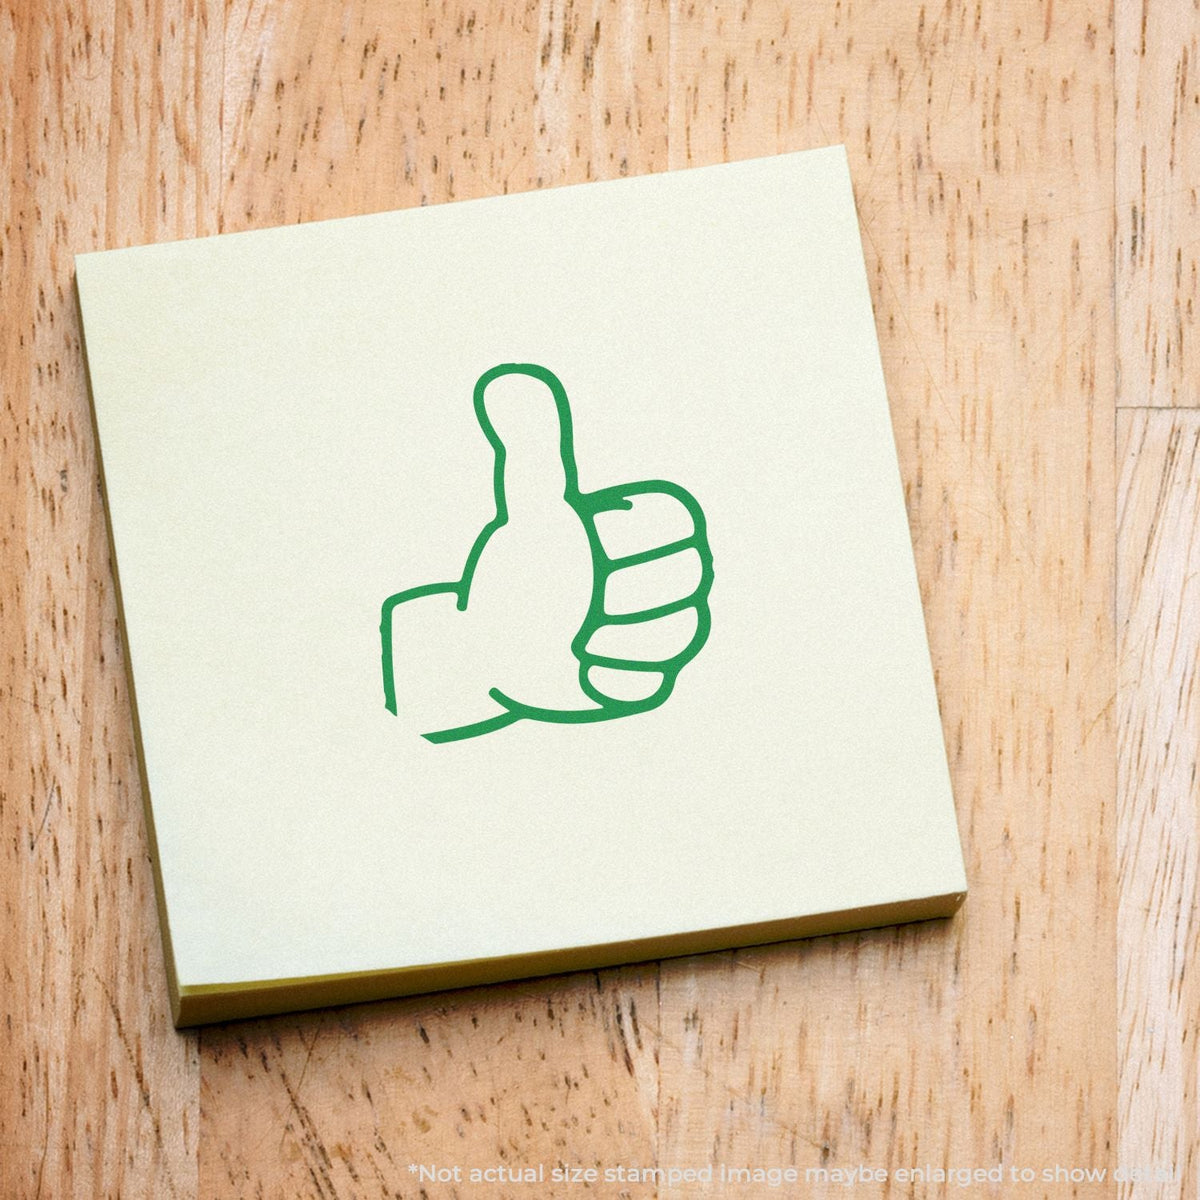 In Use Self-Inking Round Thumbs Up Stamp Image